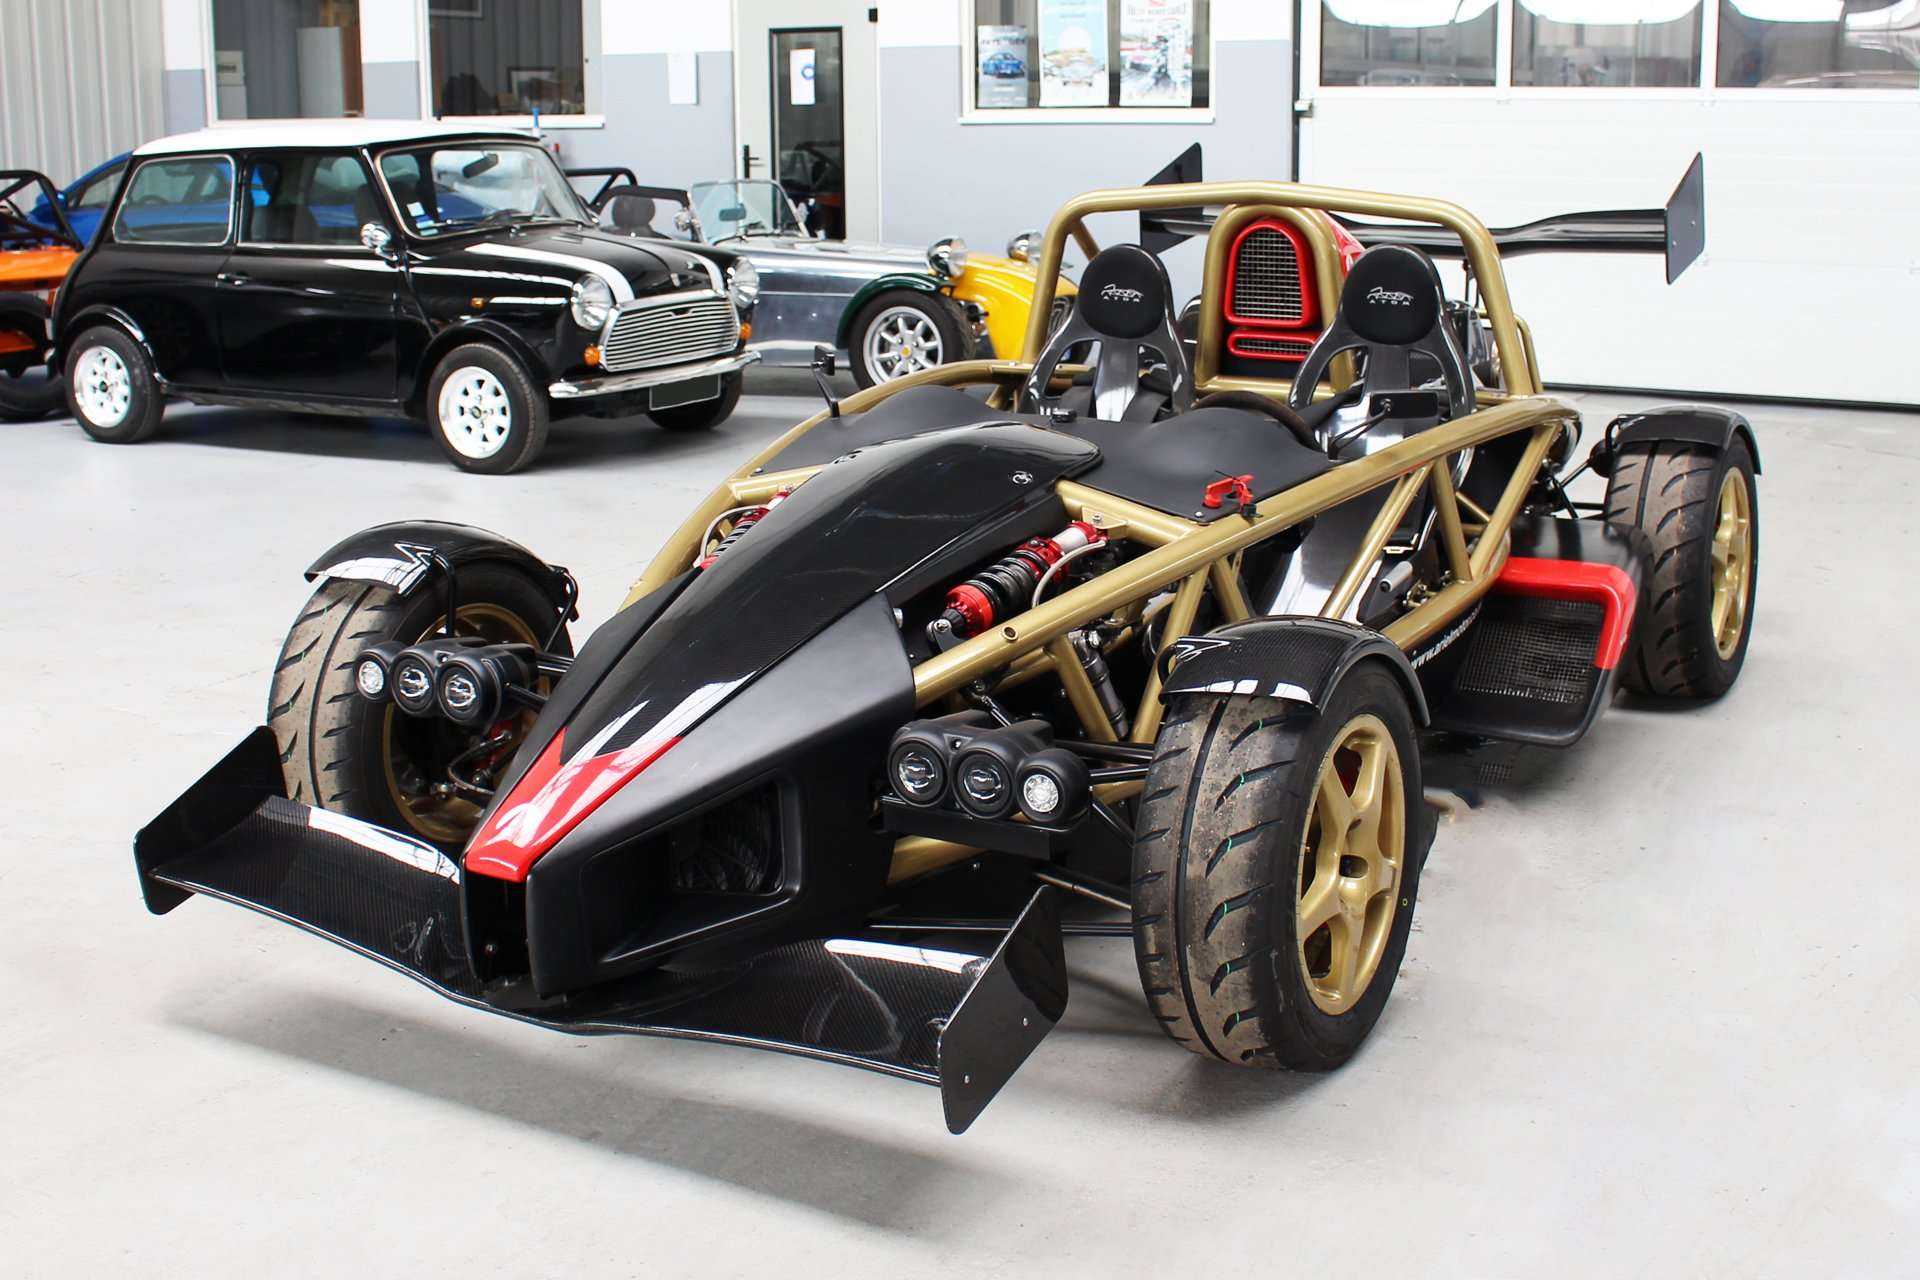 Ariel Motor Atom Other in Black used in La Grand-Croix for € 169,990.-